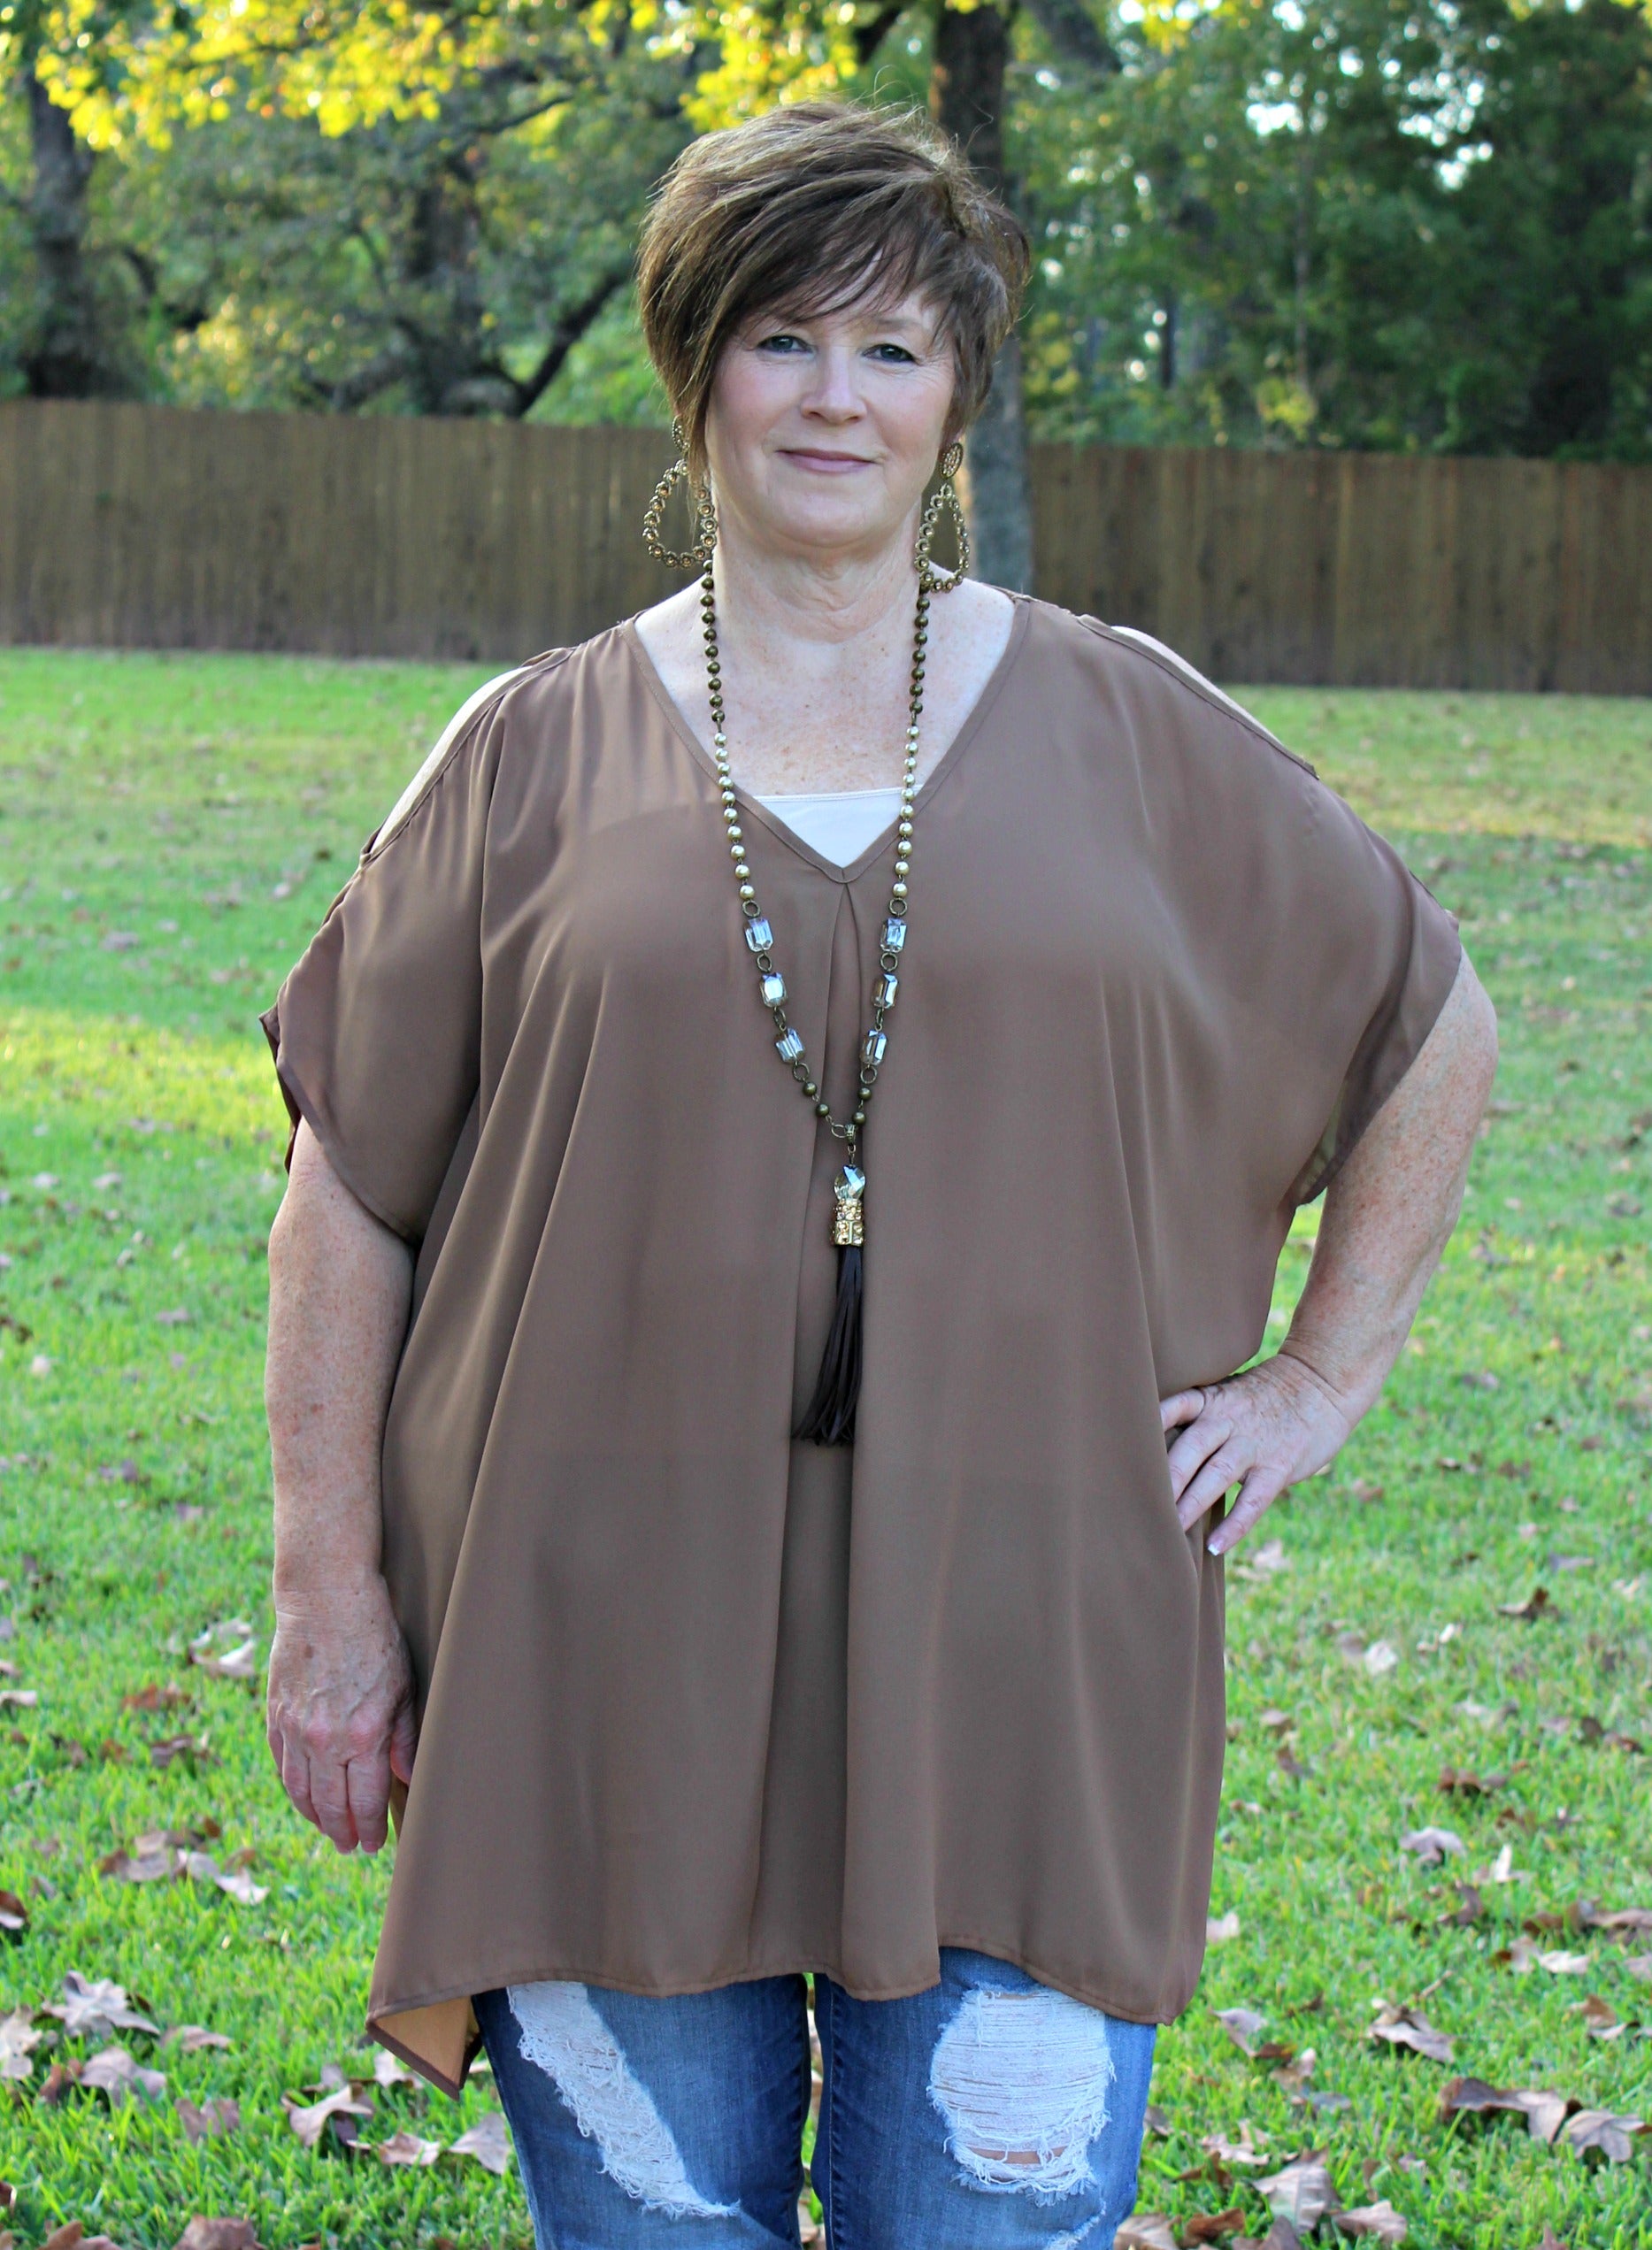 Last Chance Size Small | Pretty Little Thing Sheer Open Shoulder Tunic in Mocha - Giddy Up Glamour Boutique